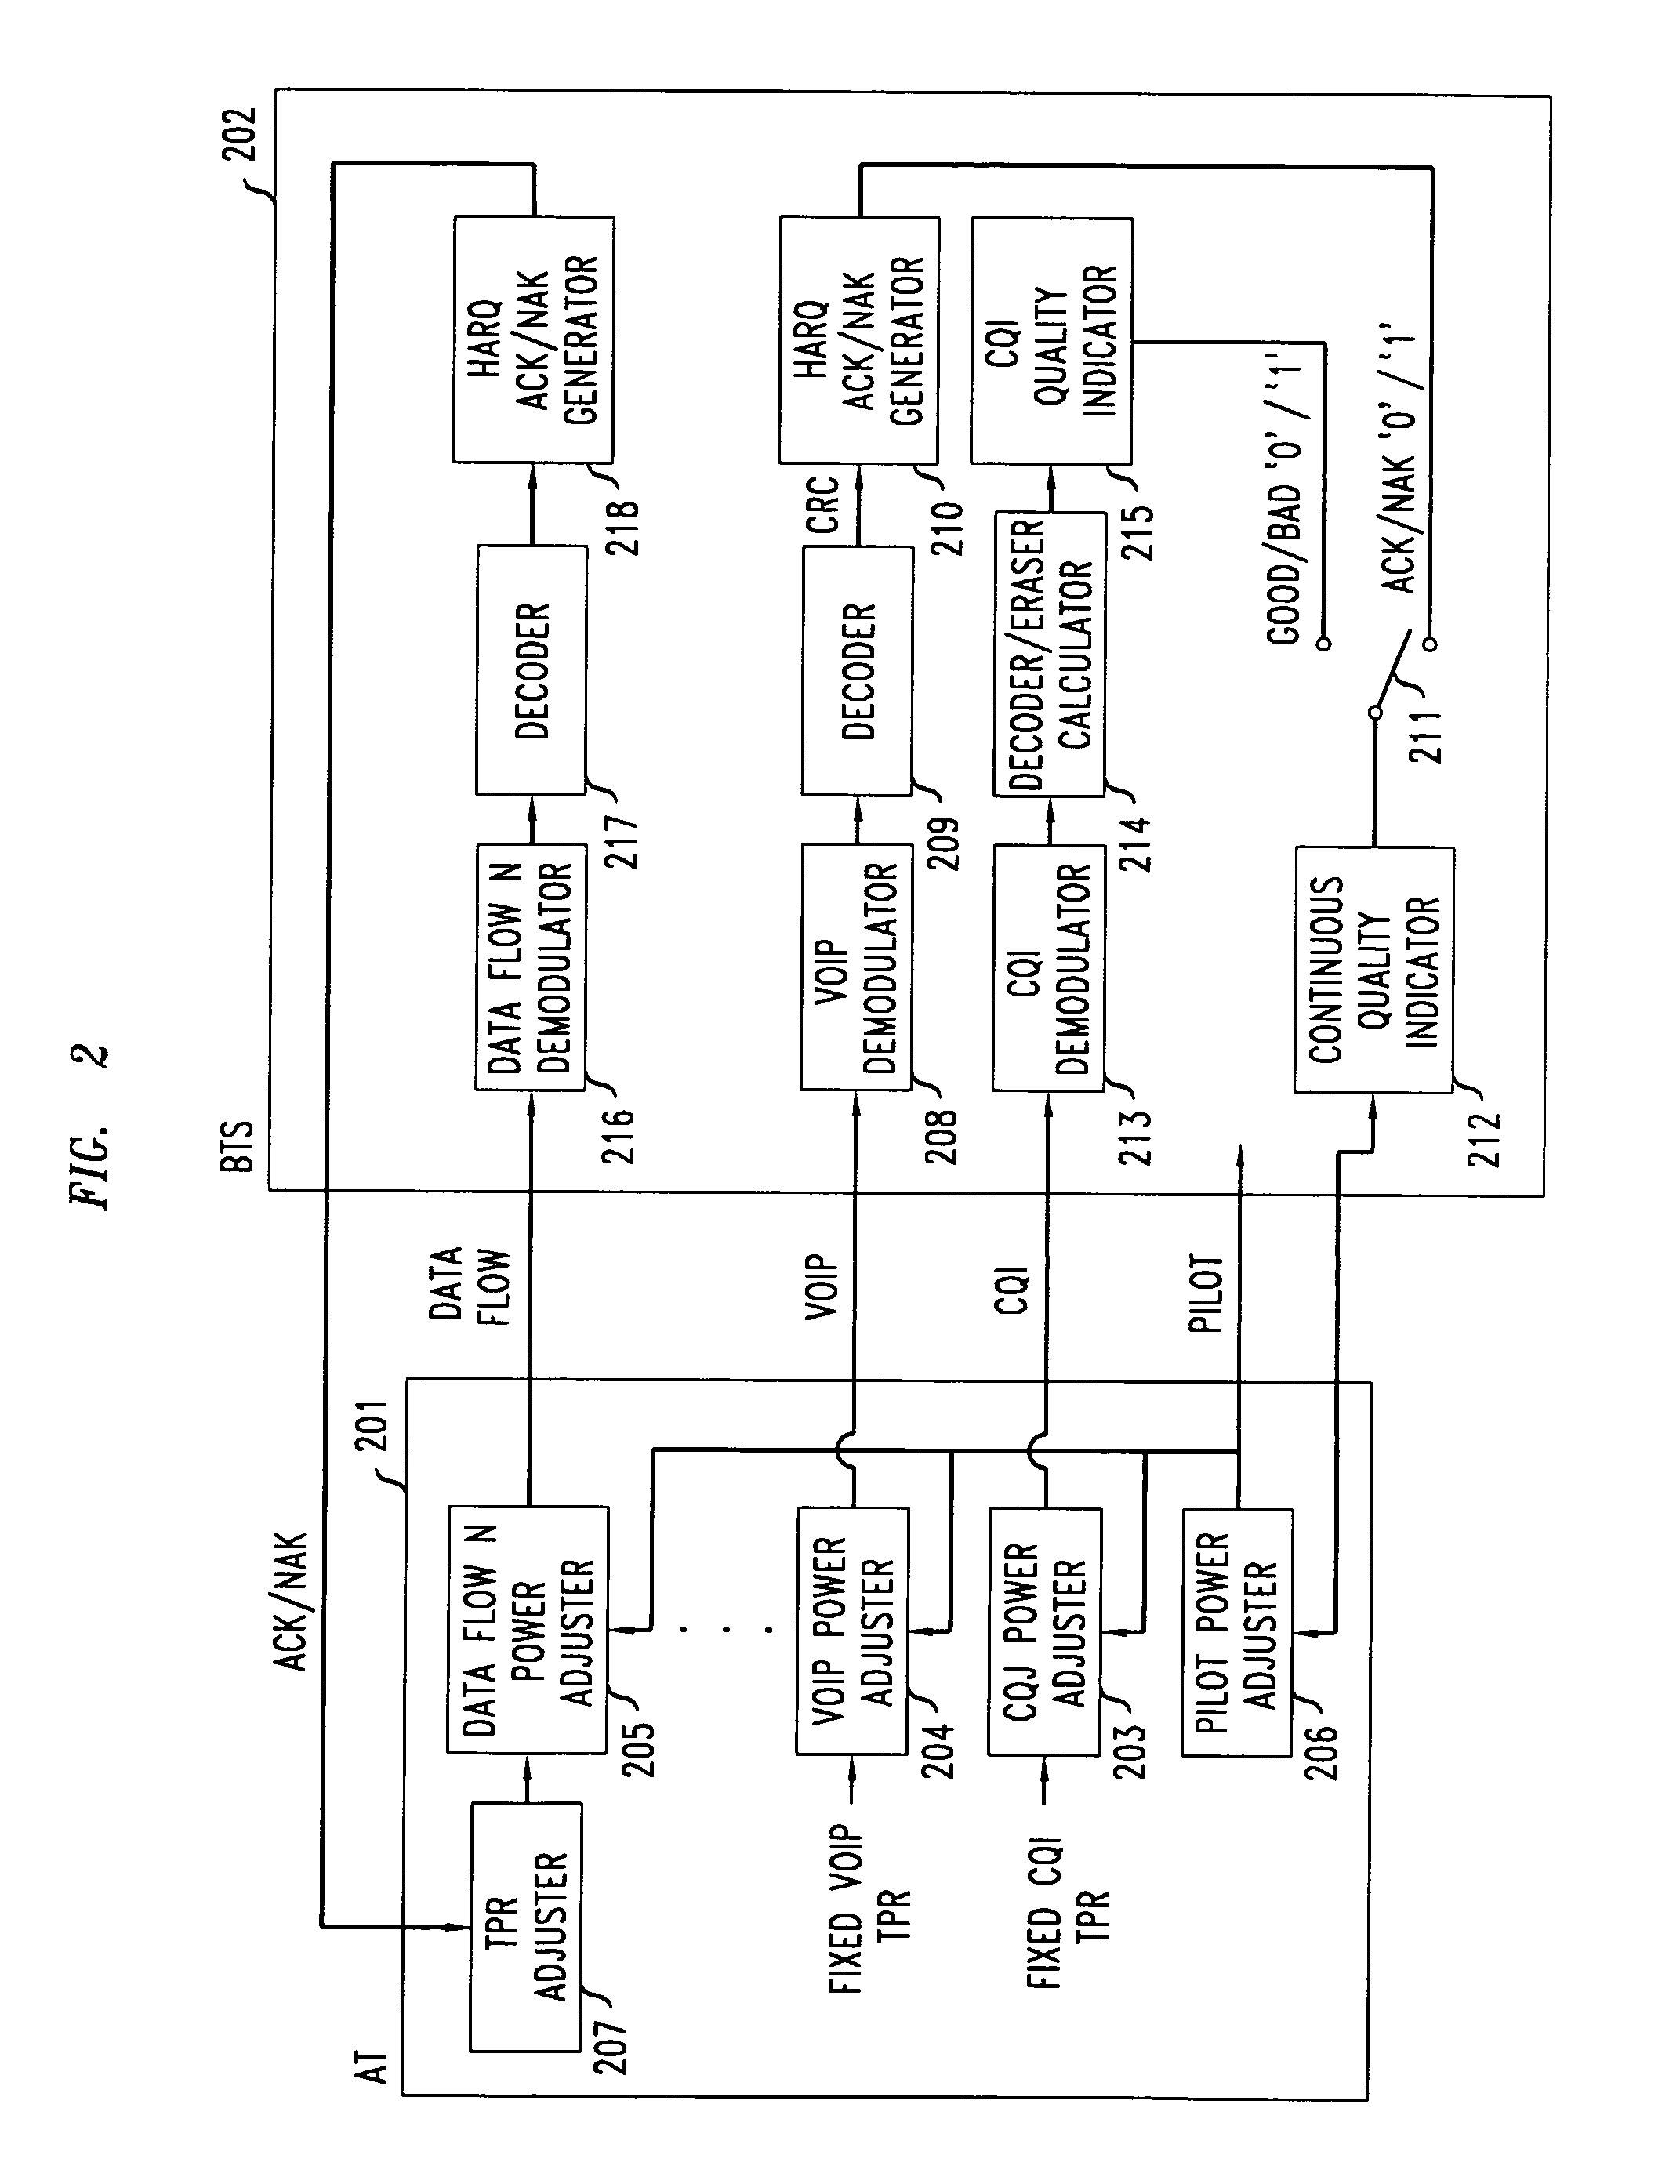 Method of reverse link dynamic power control in a wireless communication system using per-flow quality feedback for multi-flow data traffic